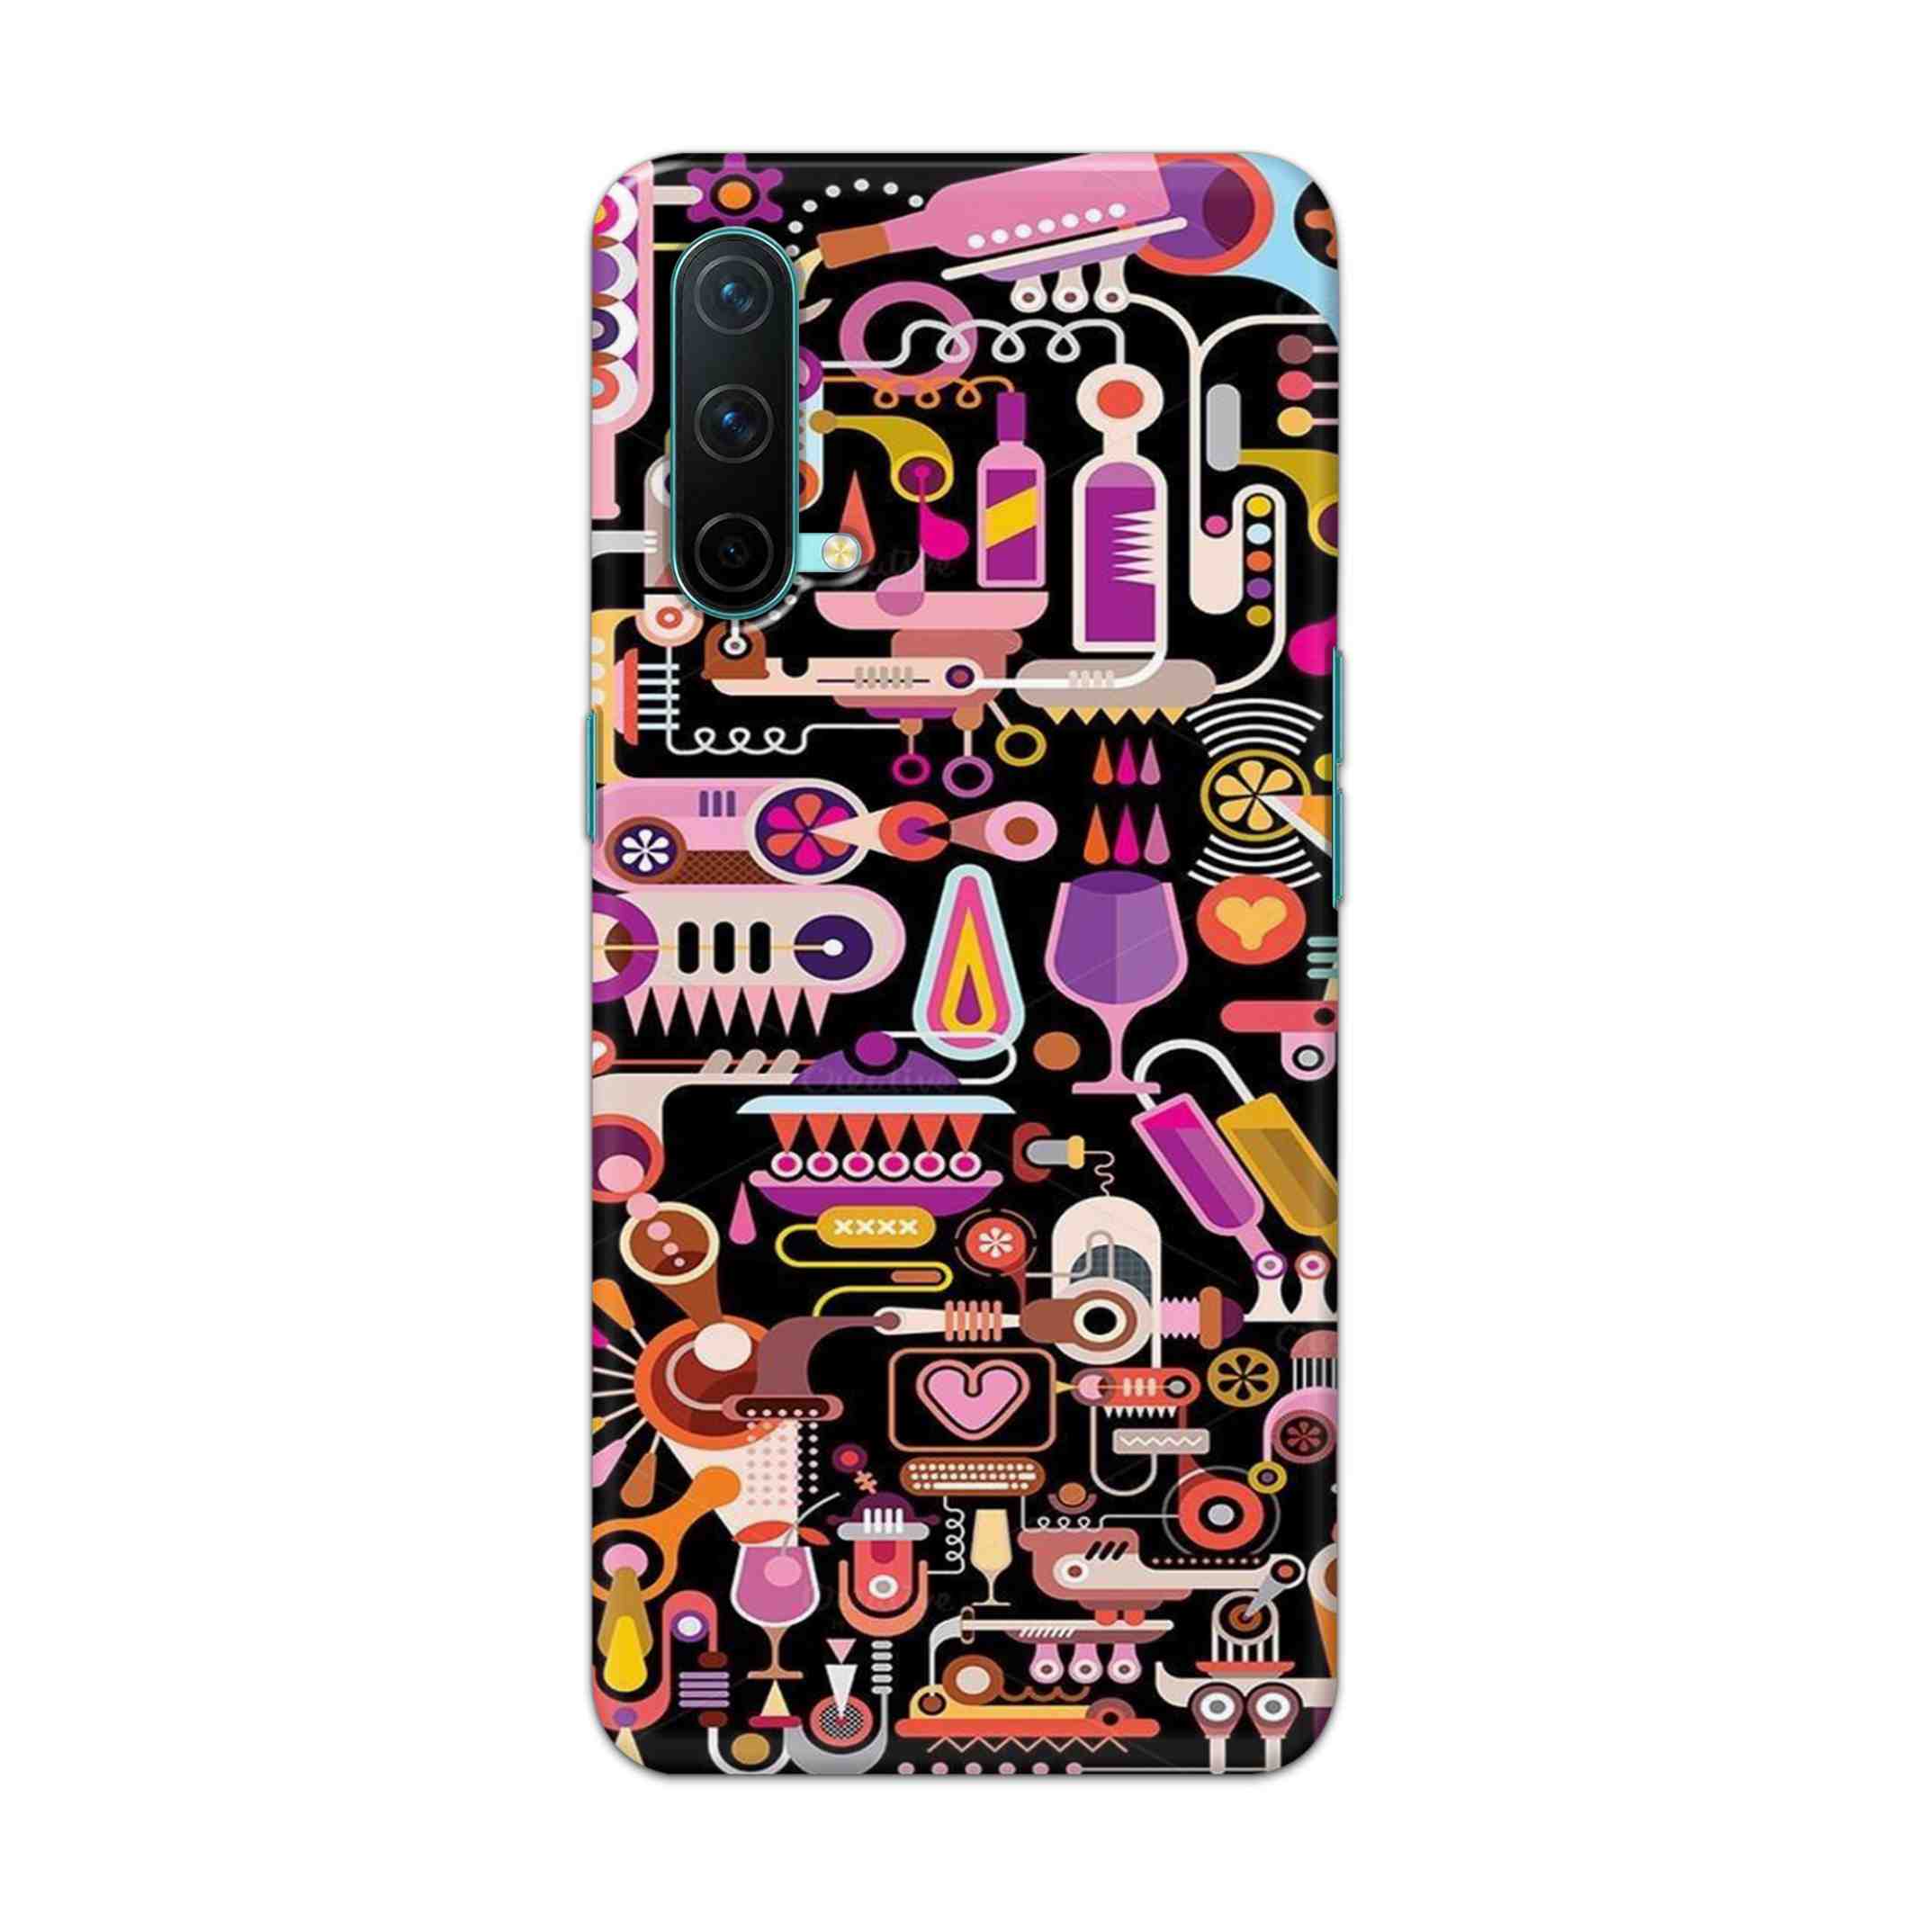 Buy Lab Art Hard Back Mobile Phone Case Cover For OnePlus Nord CE Online